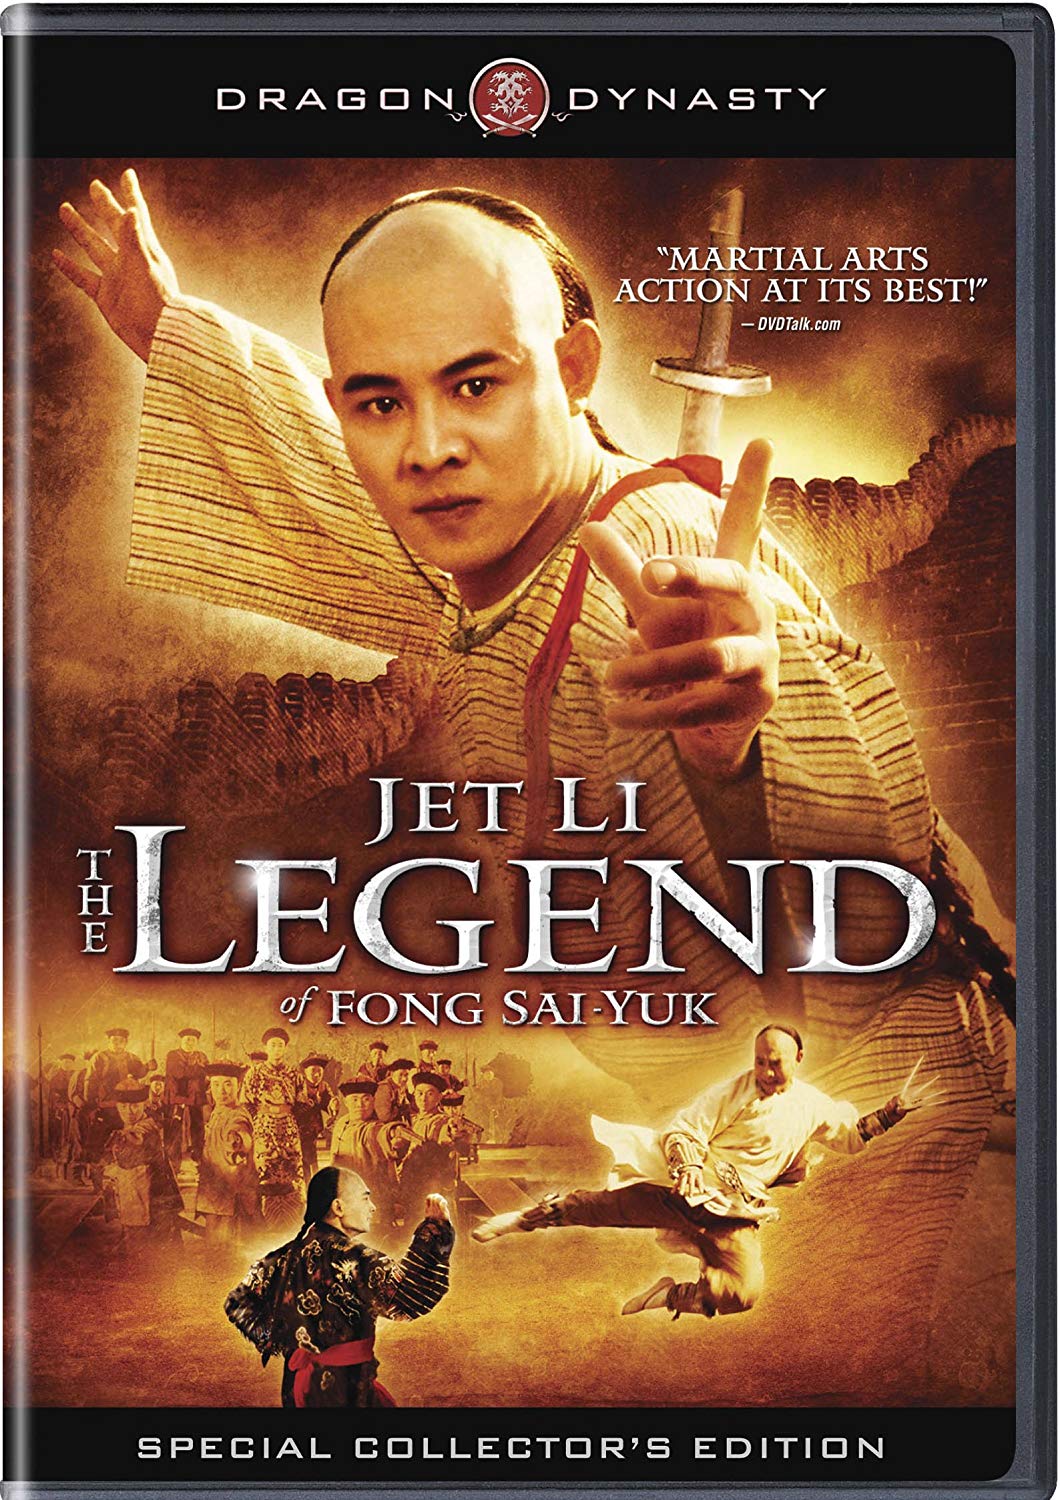 Jet Li's The Legend - Special Collector's Edition DVD